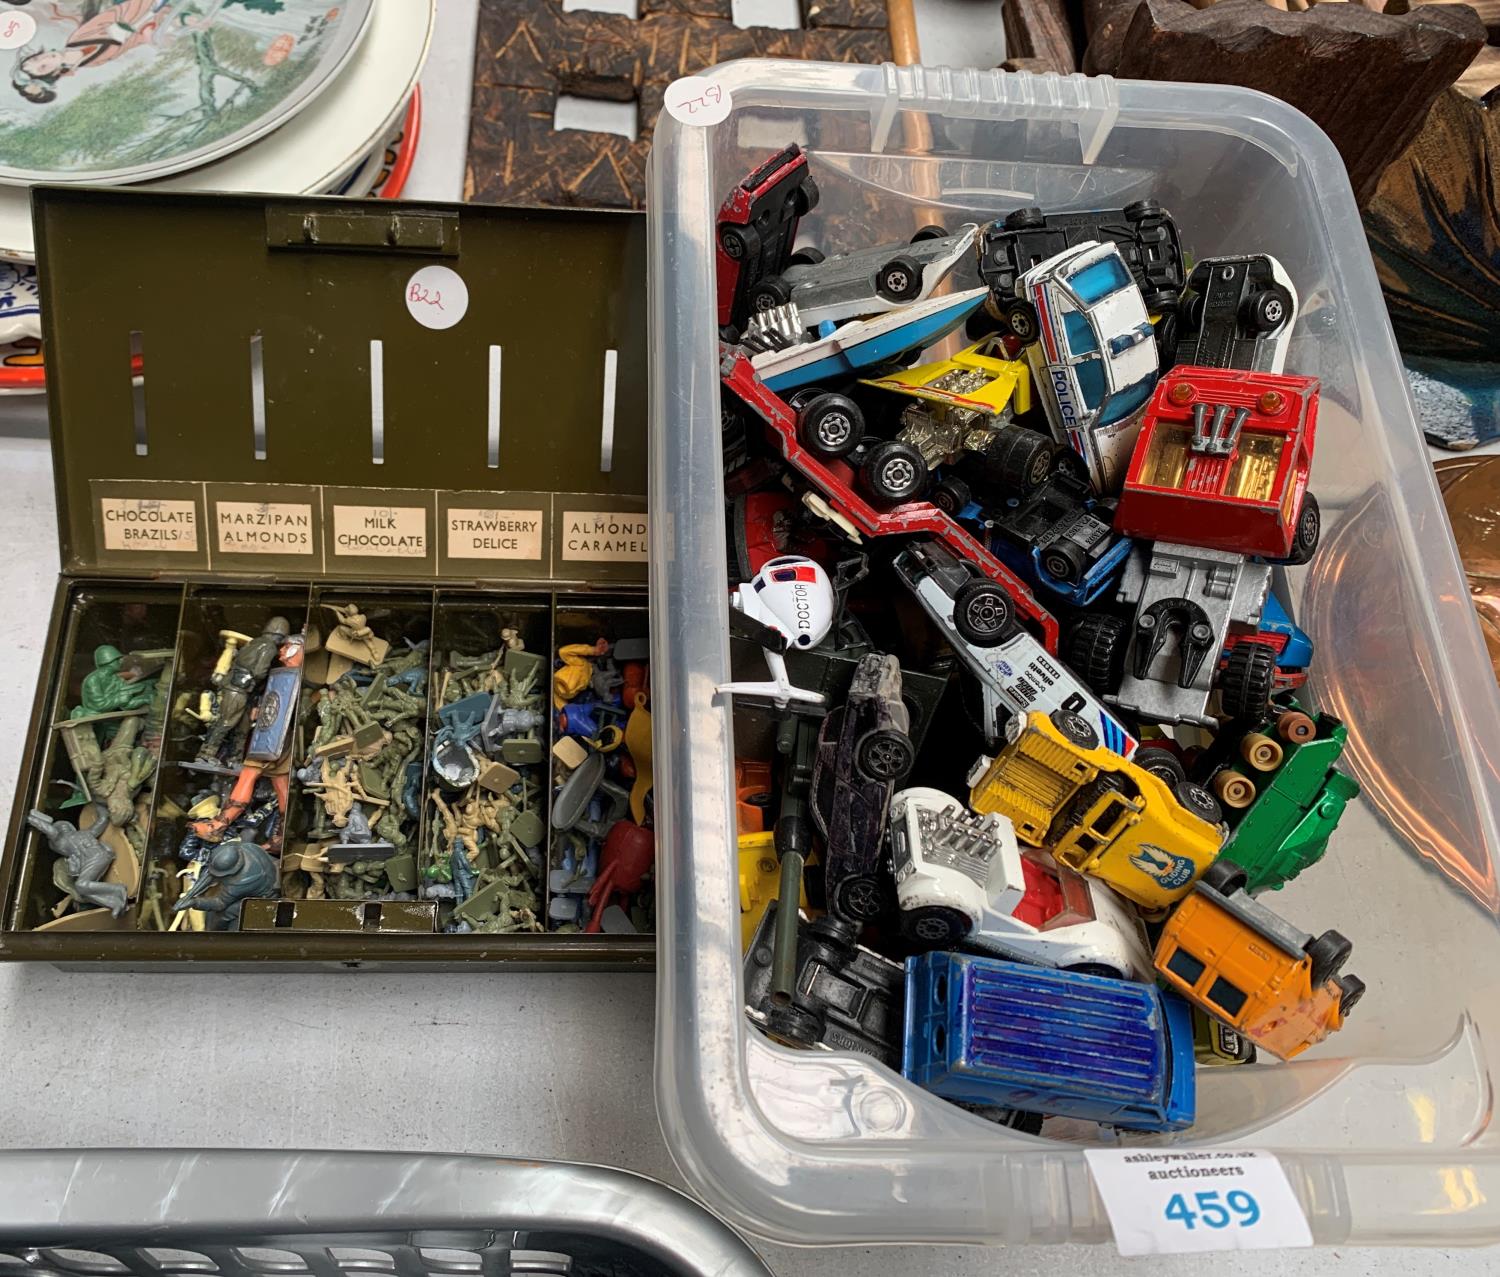 A LARGE ASSORTMENT OF TOY MODEL CARS AND FURTHER BOX CONTAINING ARMY FIGURES